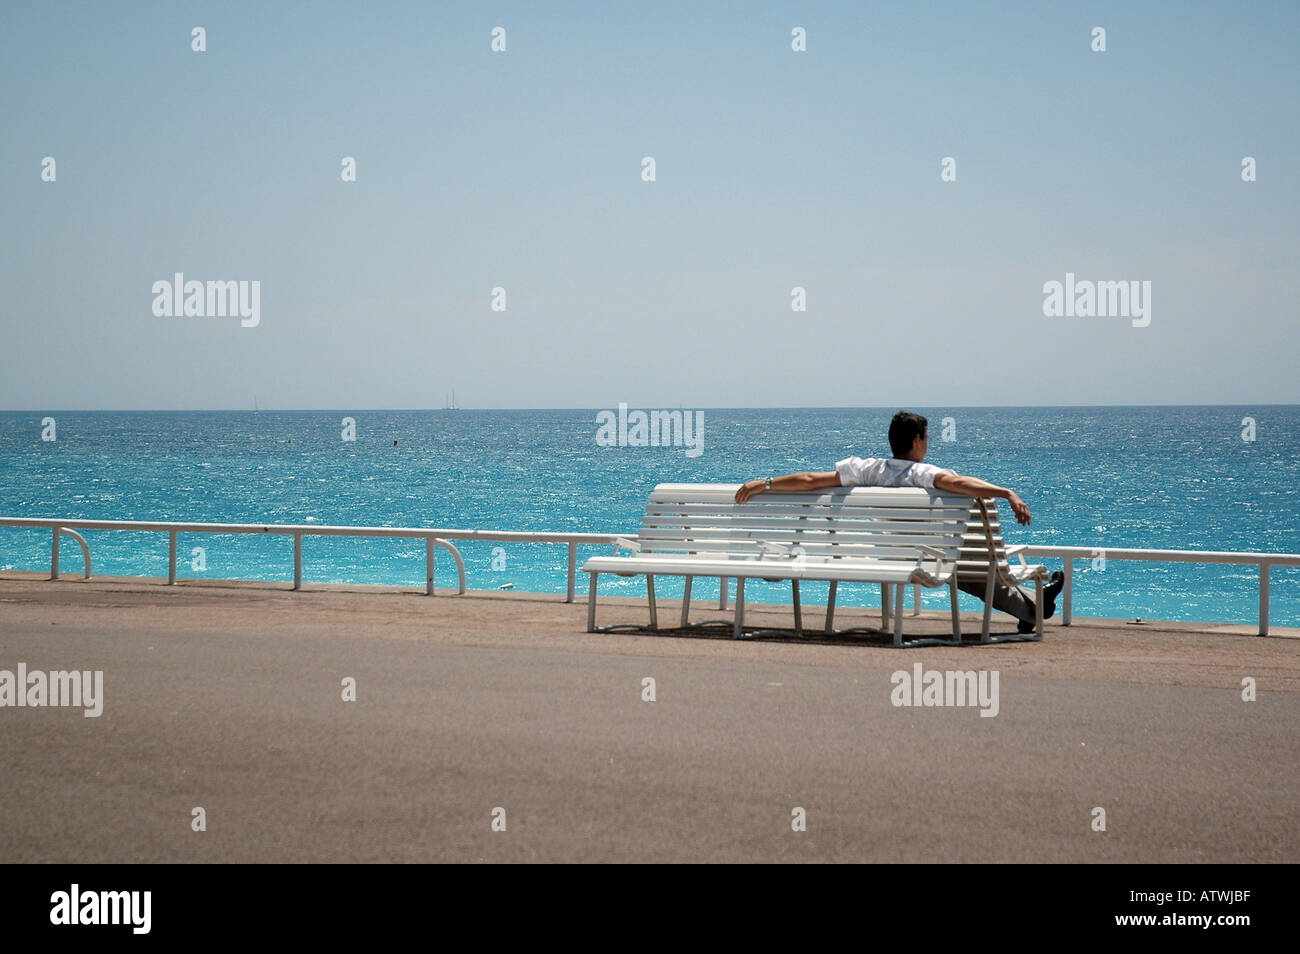 Relaxing and taking in the view on a bench on the seafront in Nice, South of France. Stock Photo